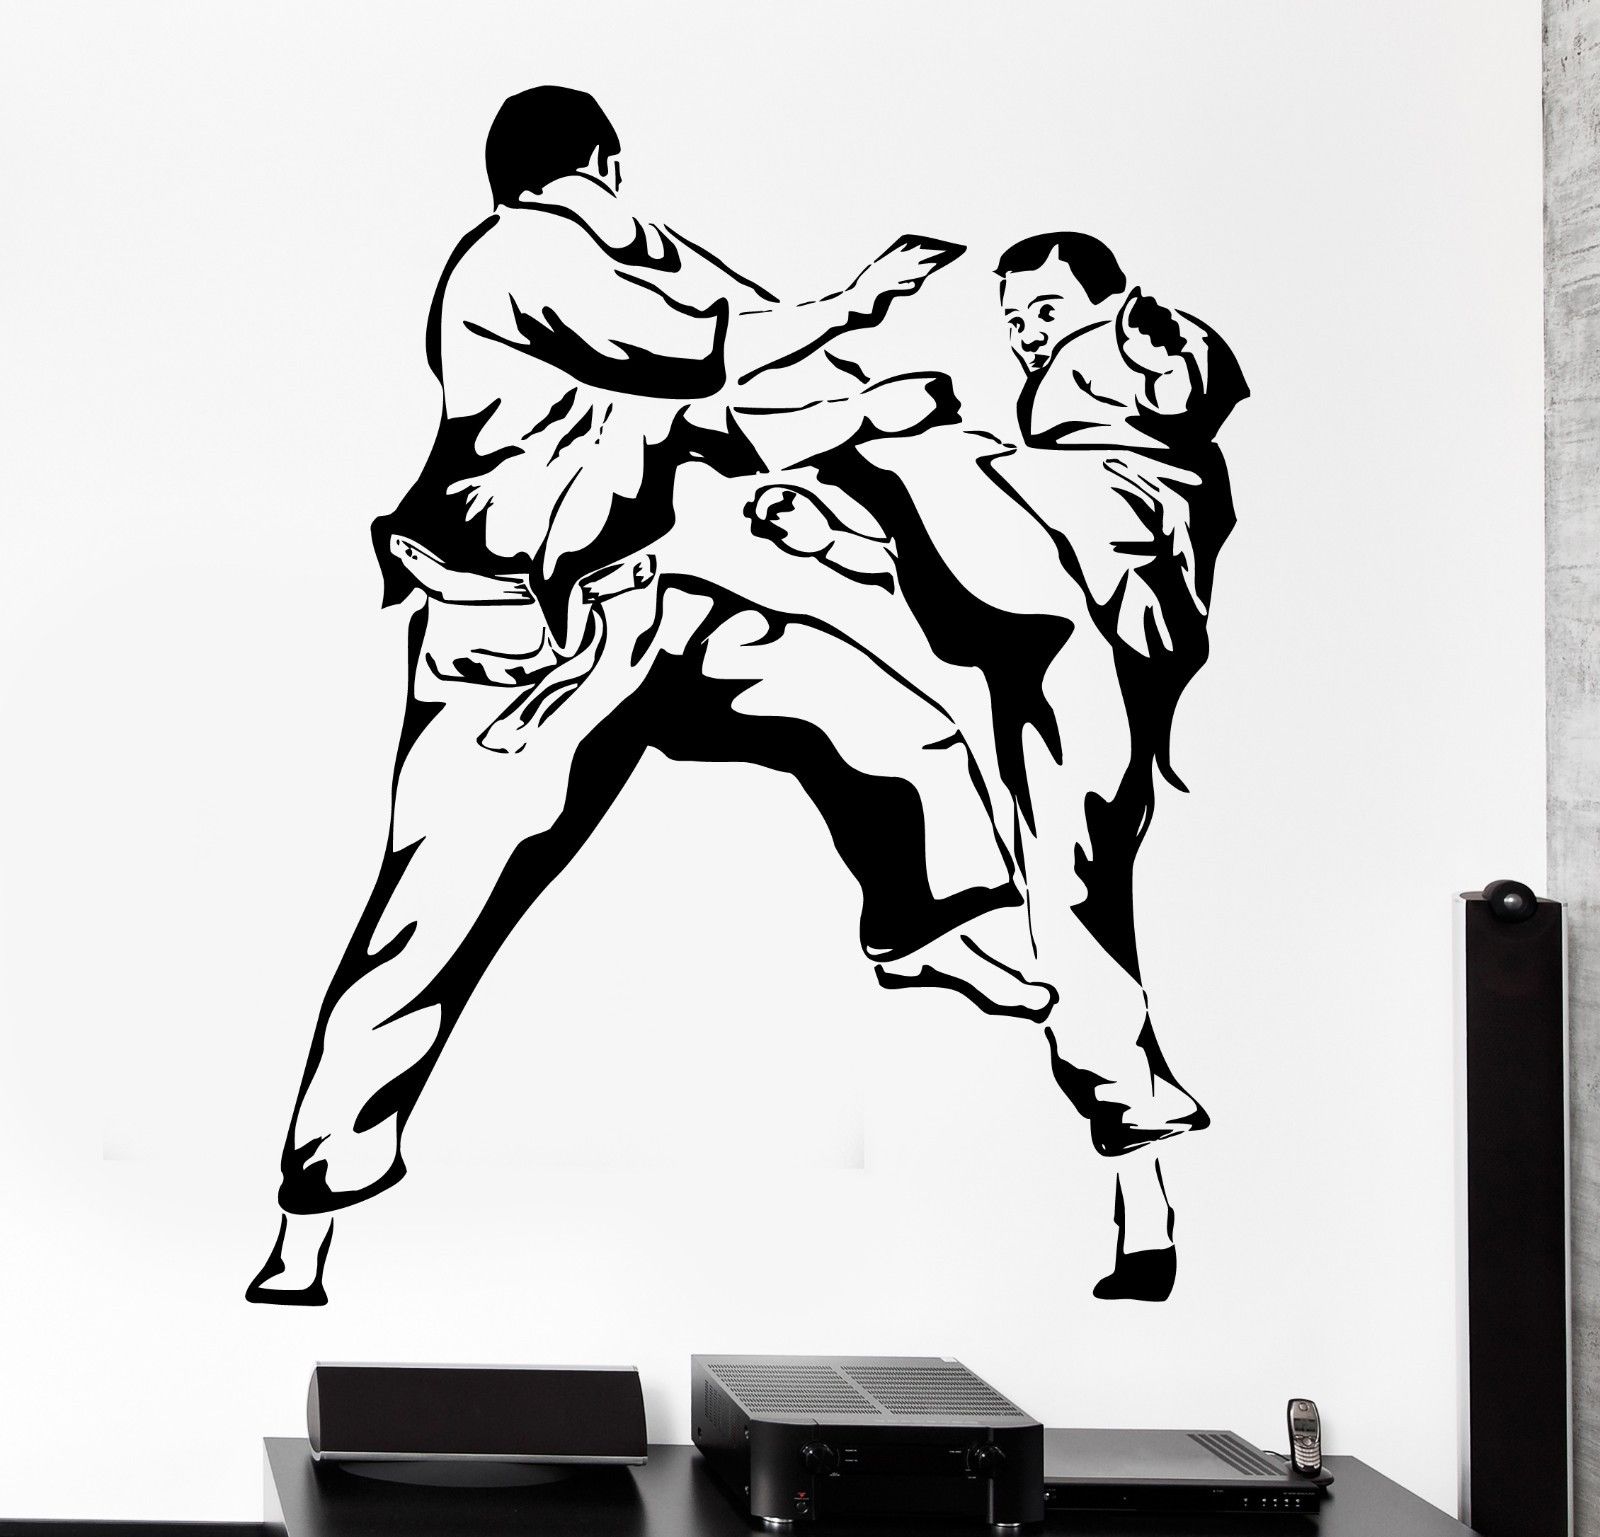 HWHD New Wall Sticker Sport Karate Martial Arts Fighting Fighter ...